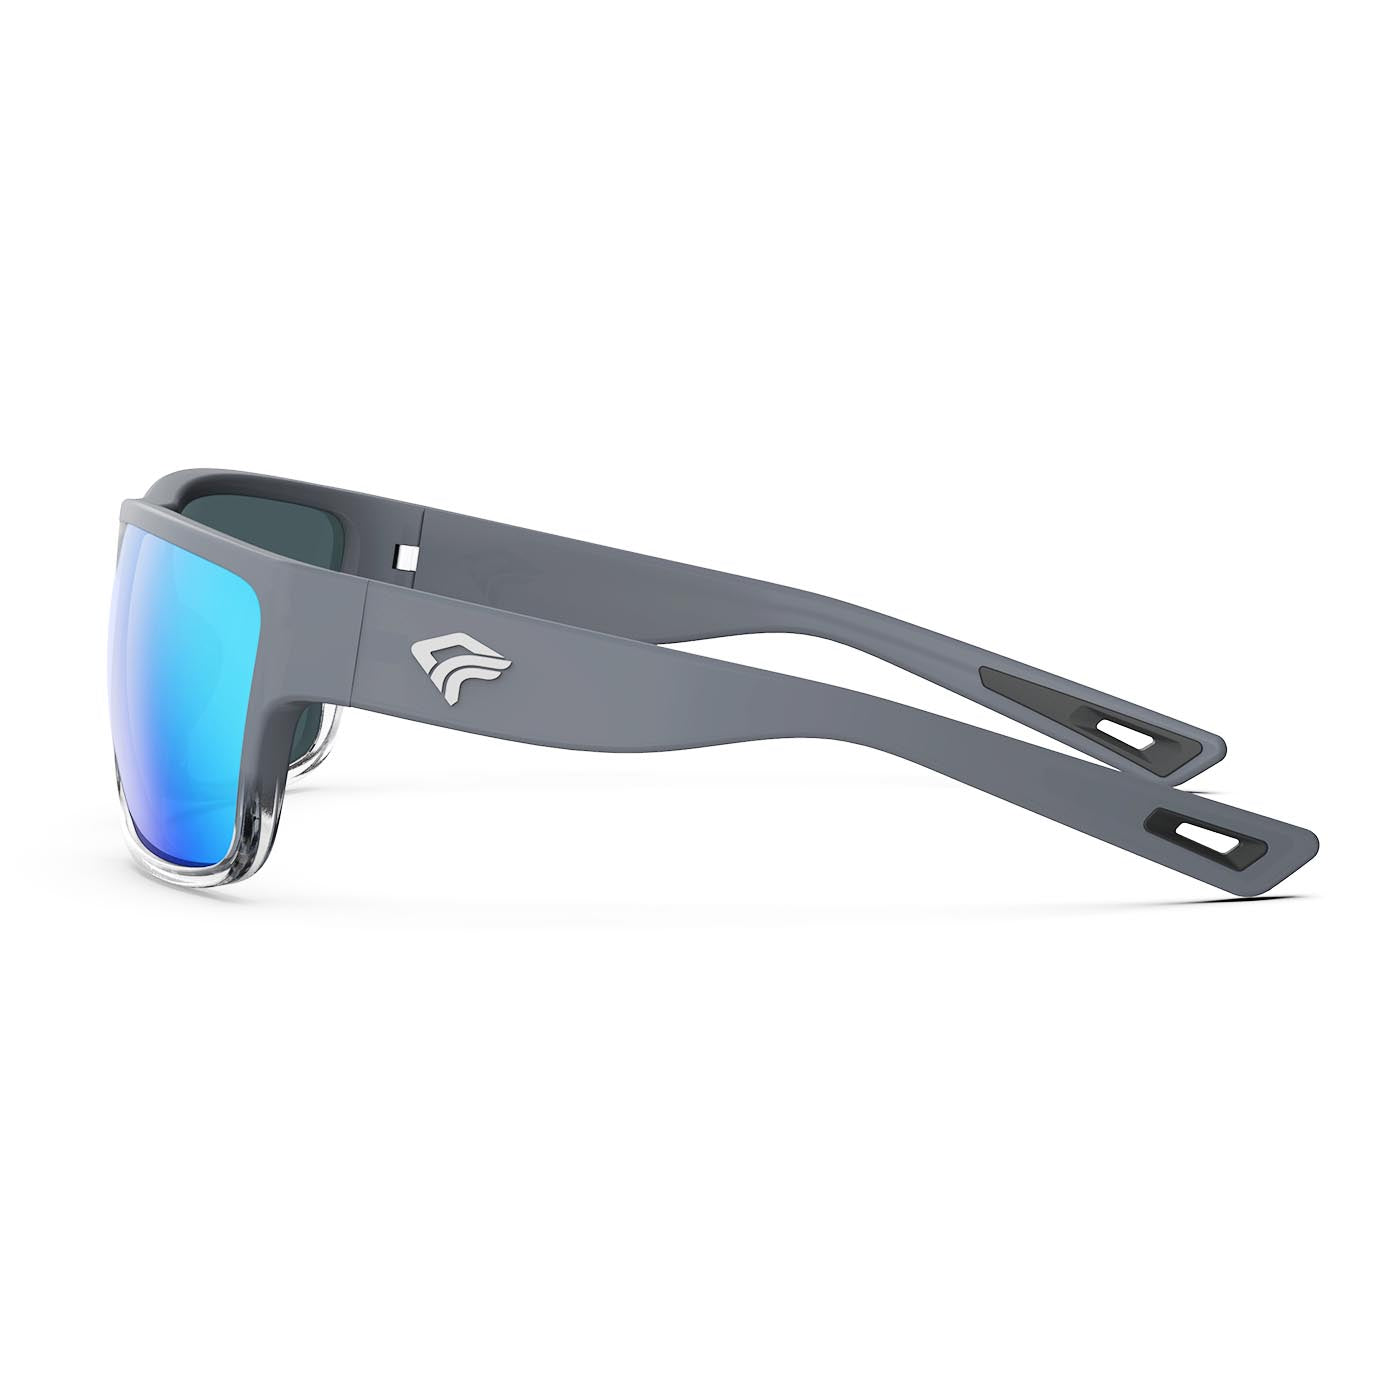 Pure Polarized - and Women for Ideal Frame - for - Matte Sports - To and Golf, Grey Transparent Running, Ideal Sunglasses Adjustable with Flexible Lifetime Cycling, Fishing Warranty and Men Half